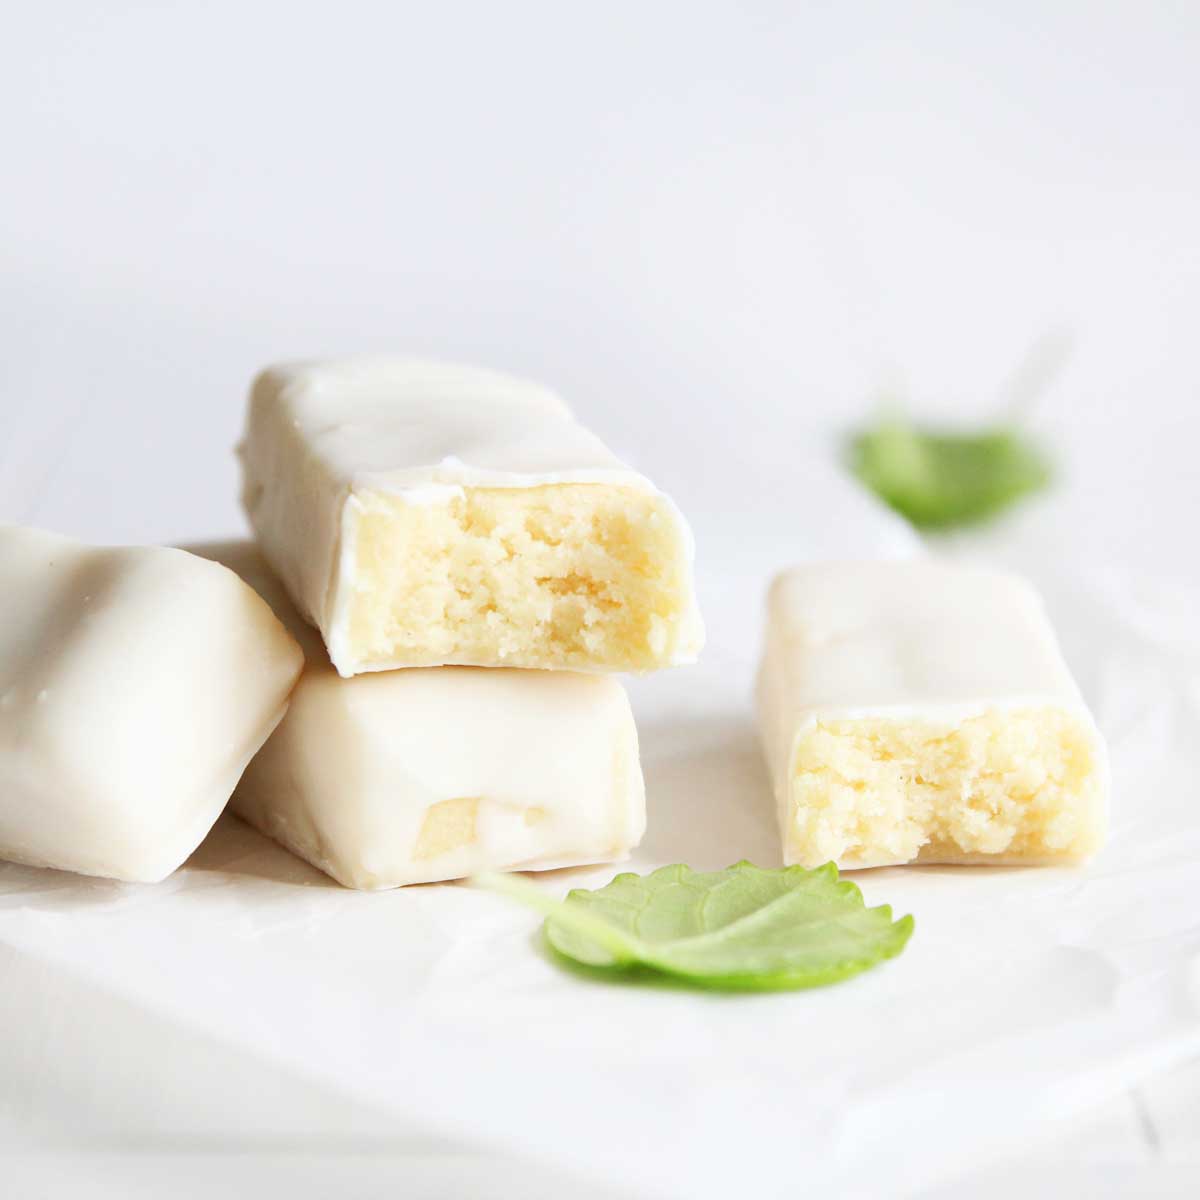 Healthy Homemade Lemon Protein Bars made with Collagen Peptides - Canned Chickpea Yeast Bread